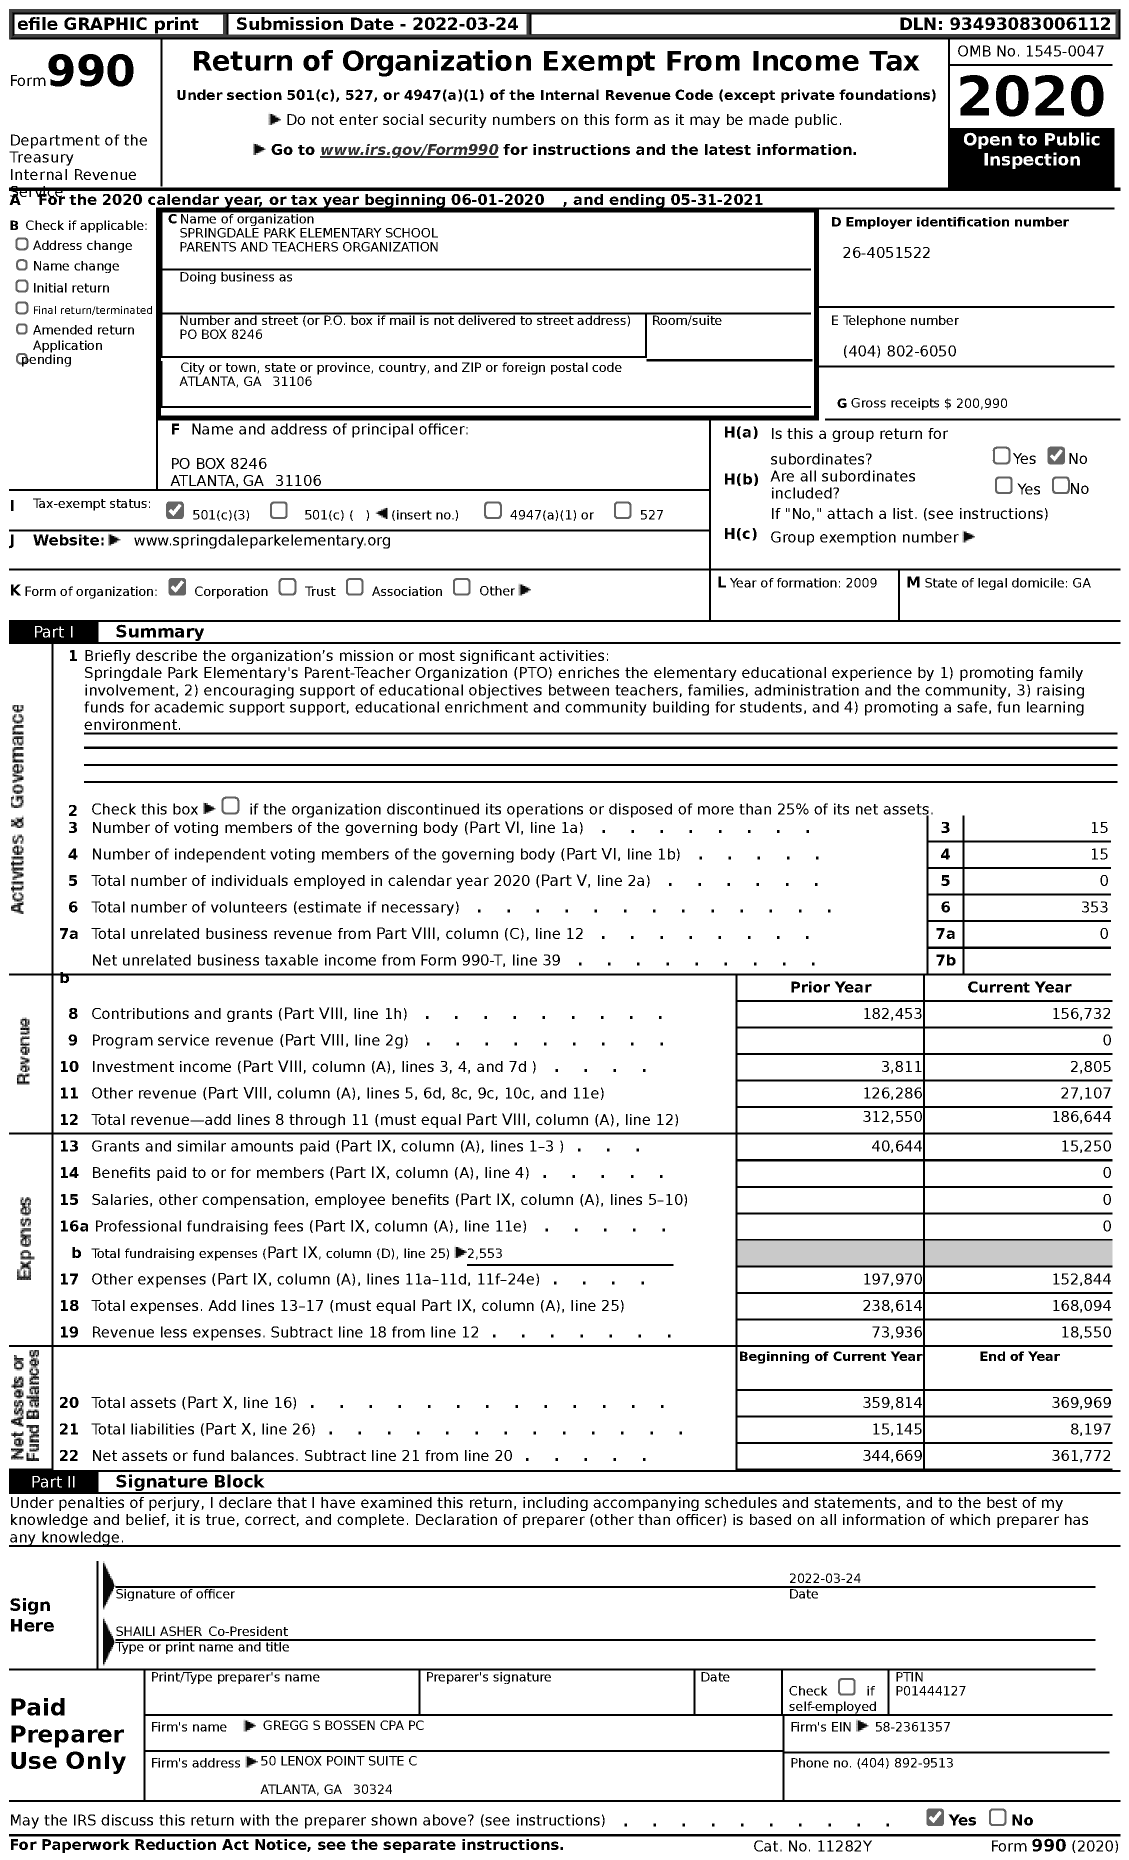 Image of first page of 2020 Form 990 for Springdale Park Elementary School Parents and Teachers Organization